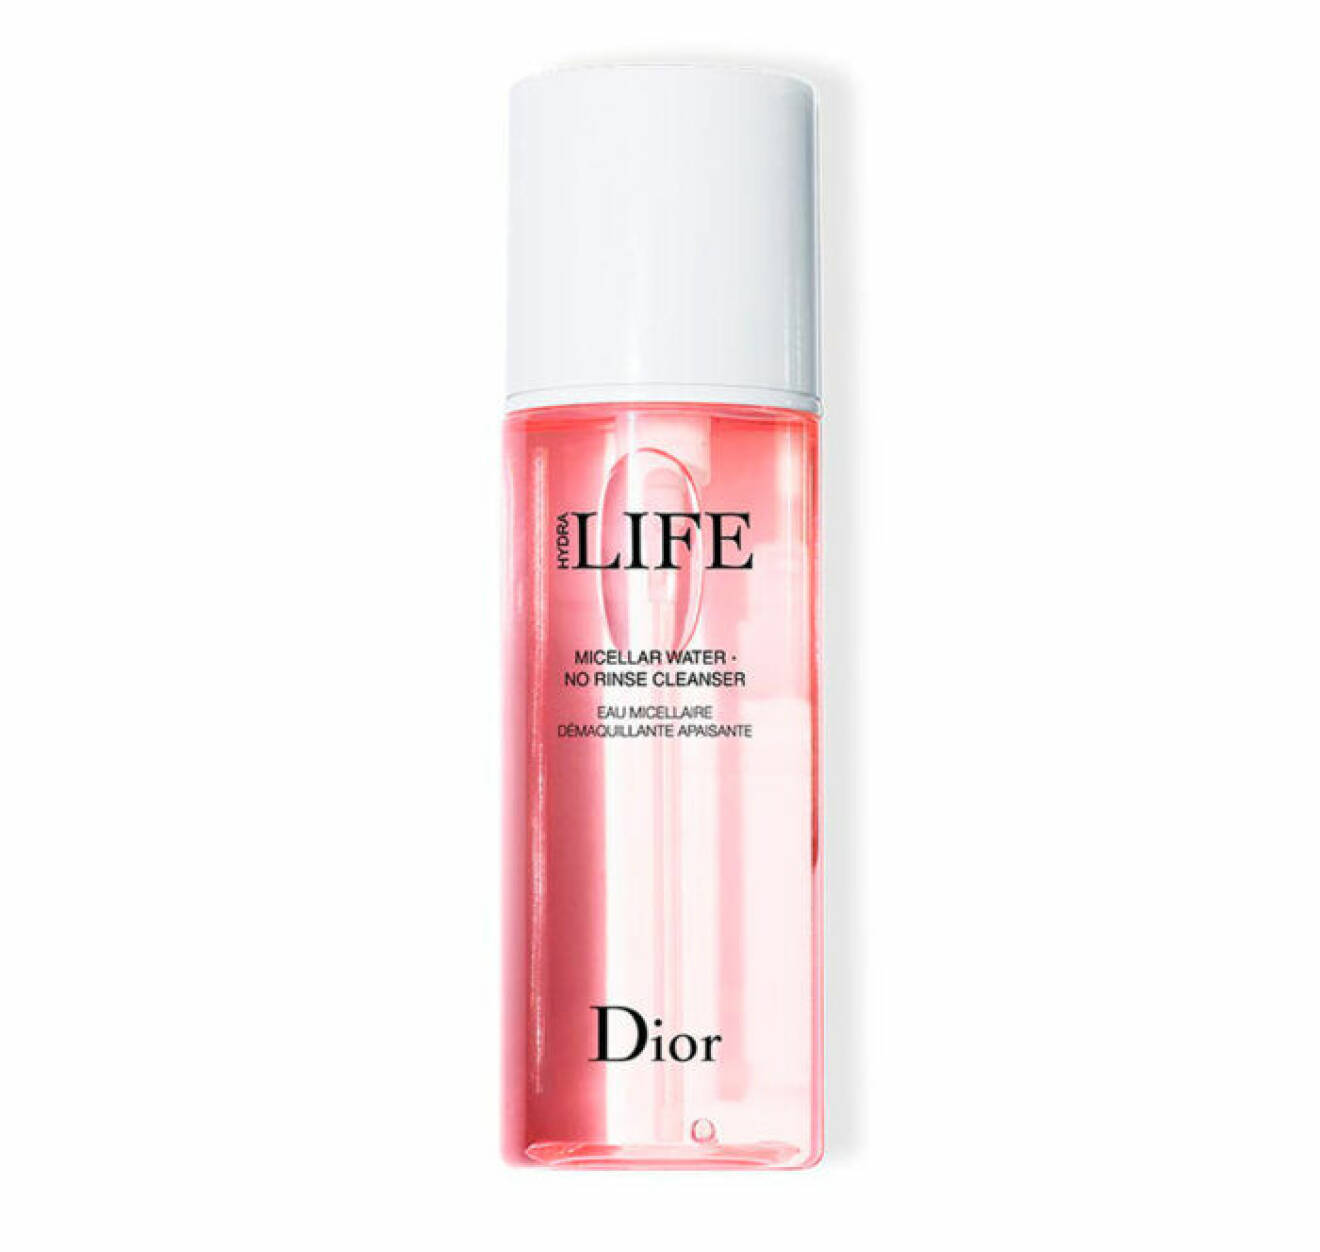 Dior miceller water